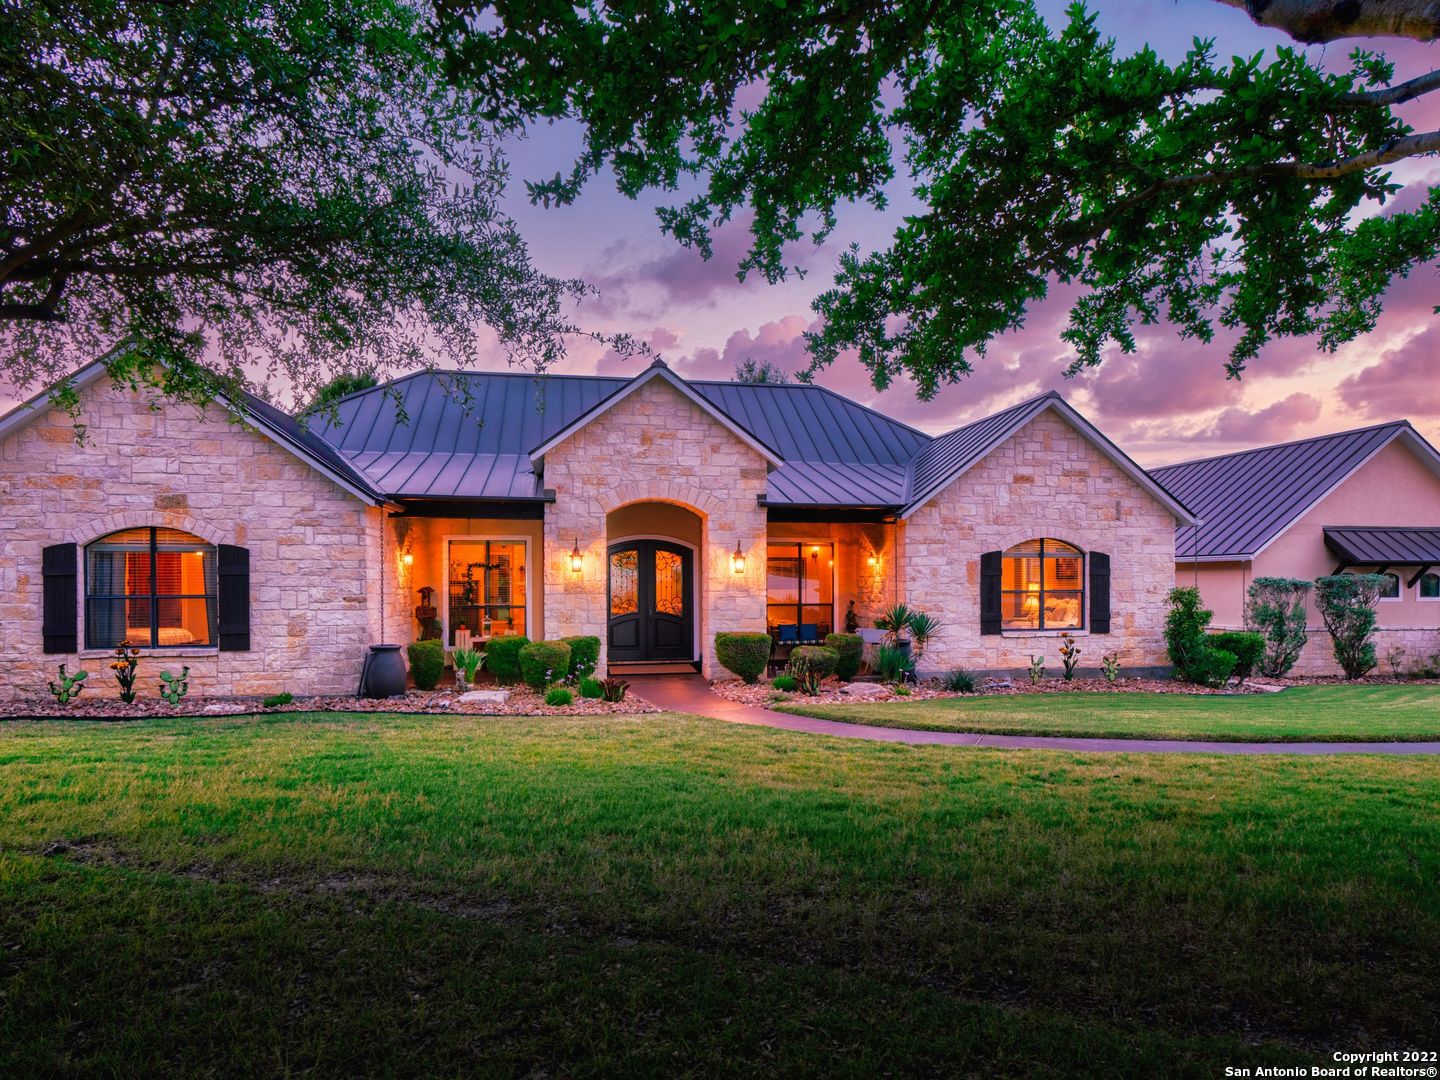 Tremendous Texas Hill Country living on 4.4 acres within the gates of Cordillera Ranch. This home has over 3,800 S.F. with plenty of space and privacy. Exquisite finishes and craftsmanship are found throughout including a stone gas fireplace, private office with patio, gas cooking, open floor plan, and stone accents. The primary retreat is complete with a sitting room and well appointed bathroom en suite with access to the laundry room. Additional guest suites are located on the opposite side of the home with large walk-in closets and bath. A separate mother-n-law suite with a full bathroom, kitchen, and living area can be accessed through a seperate entrance on the side of the home. Additional detached 1,753 S.F. workshop and garage with one of the only RV/boat storage garages in the Cordillera Ranch community. Multiple patios positioned around the home with a hot tub and deck looking out at the back yard views. Beyond this extraordinary home, enjoy the resort-style living within Cordillera Ranch that includes amenities like the Golf Course, Country Club, a private Guadalupe River park, and endless trails for walking, riding, or biking.